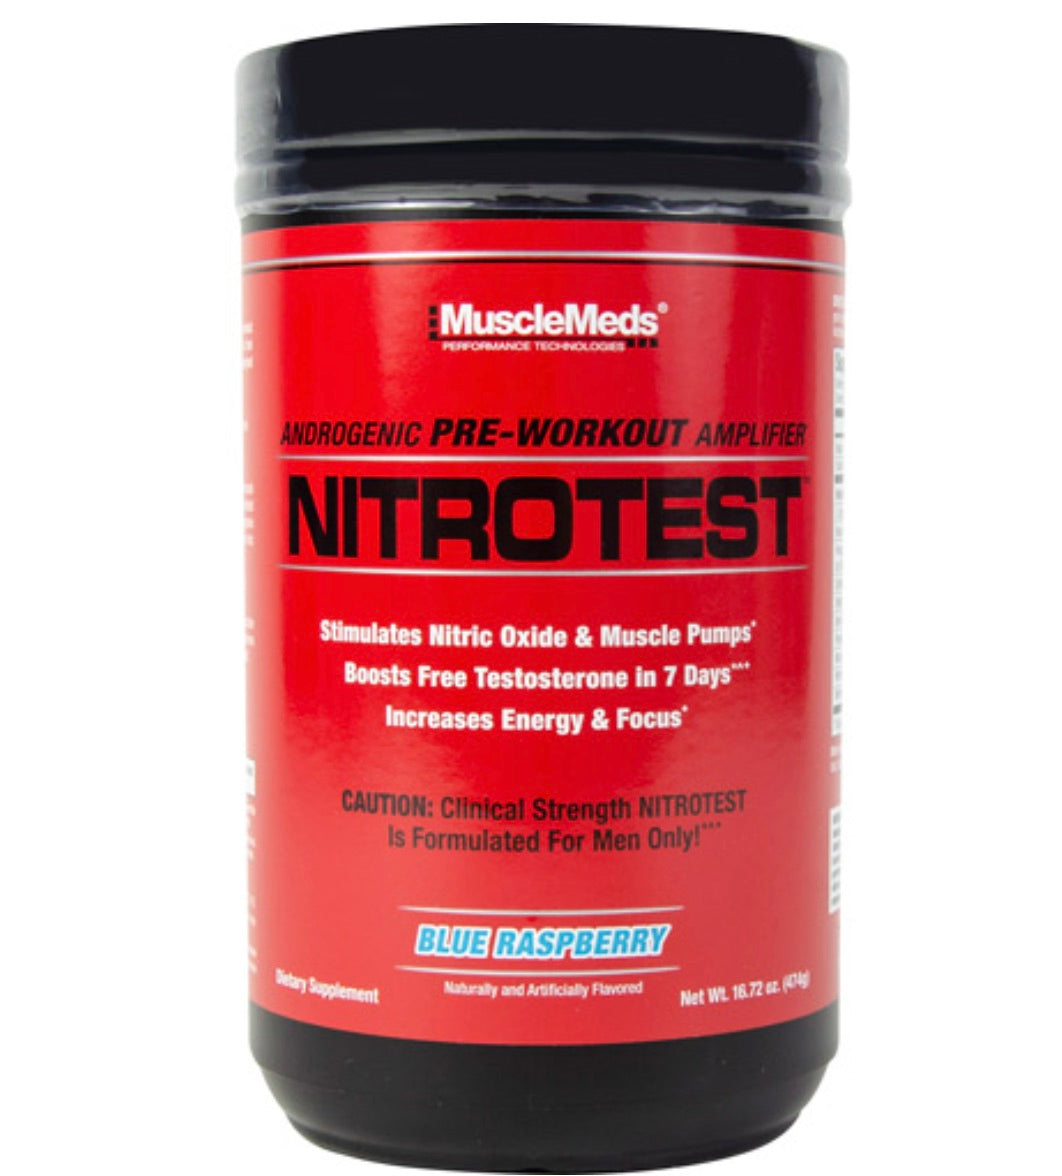 Copy of Muscle Meds Pre-Workout Nitrotest - Blue Raspberry 30 Servings